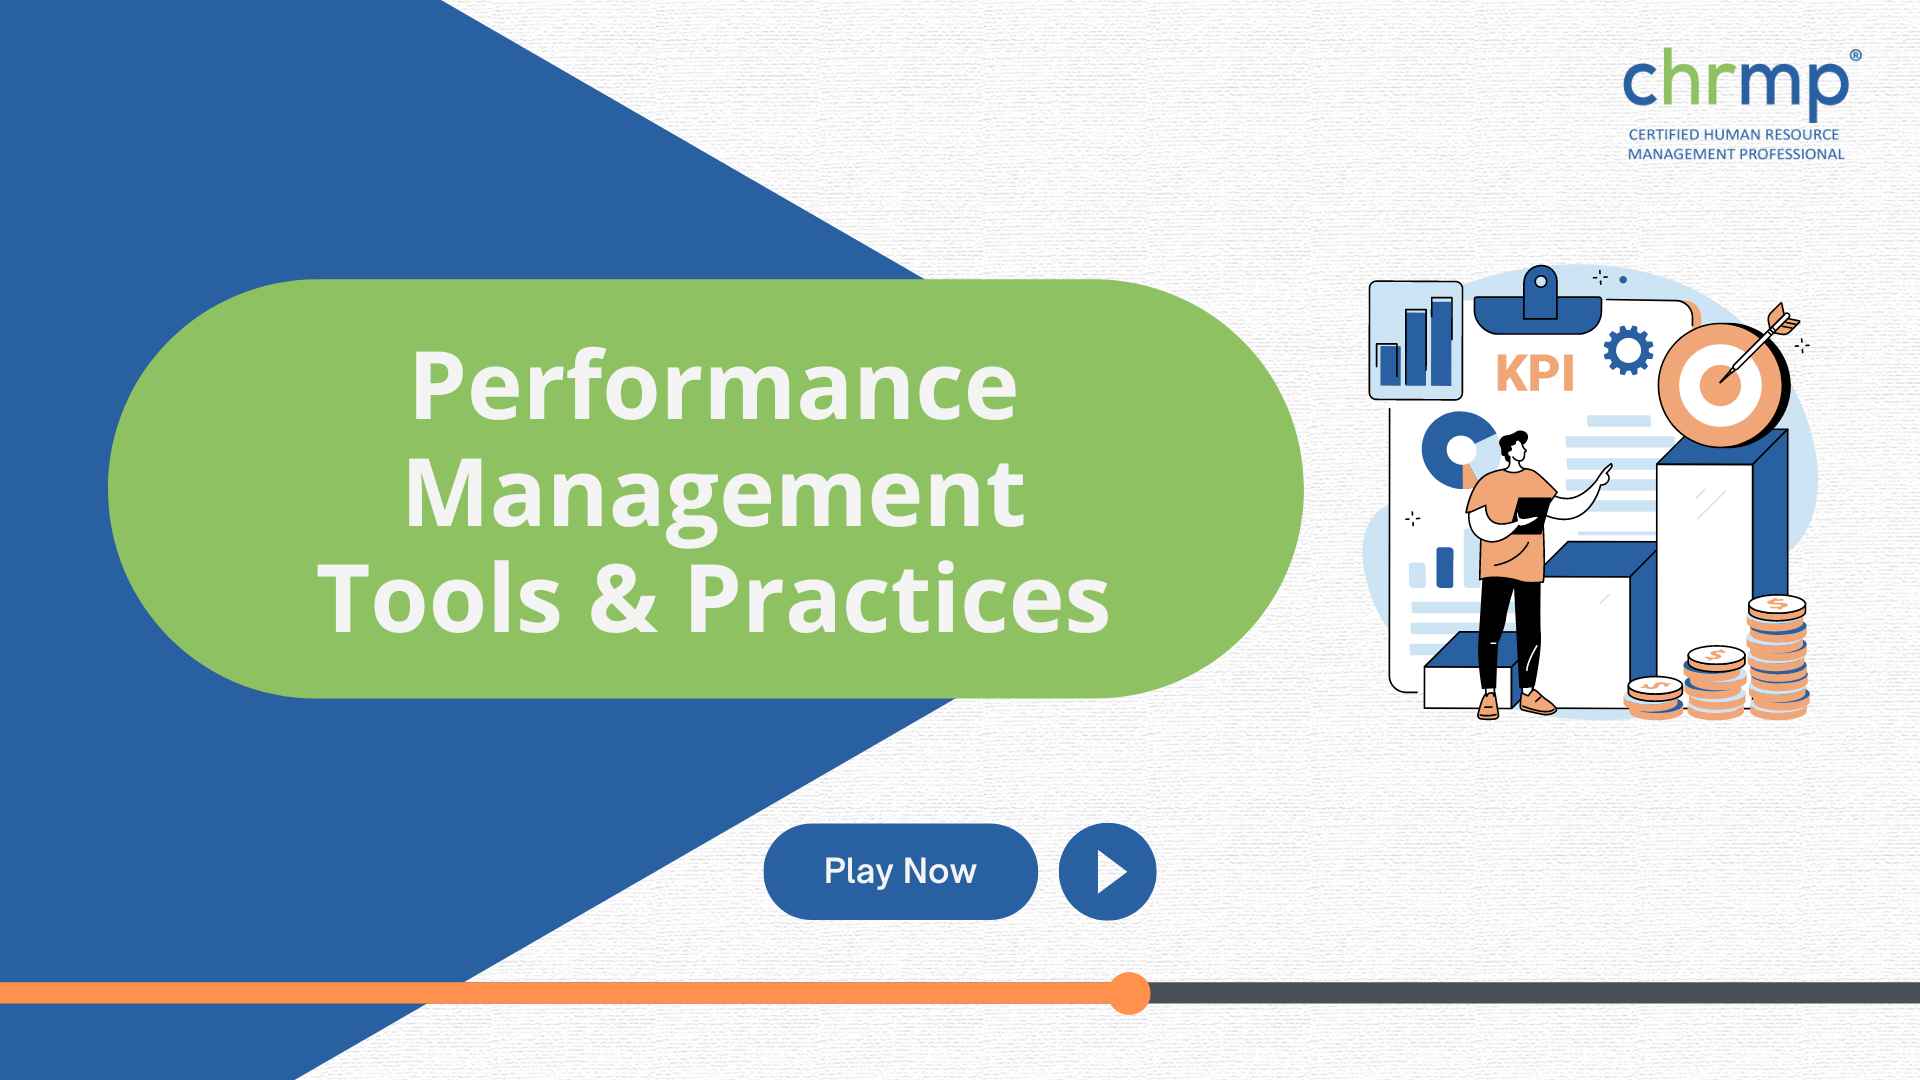 Performance Management Tools & Practices